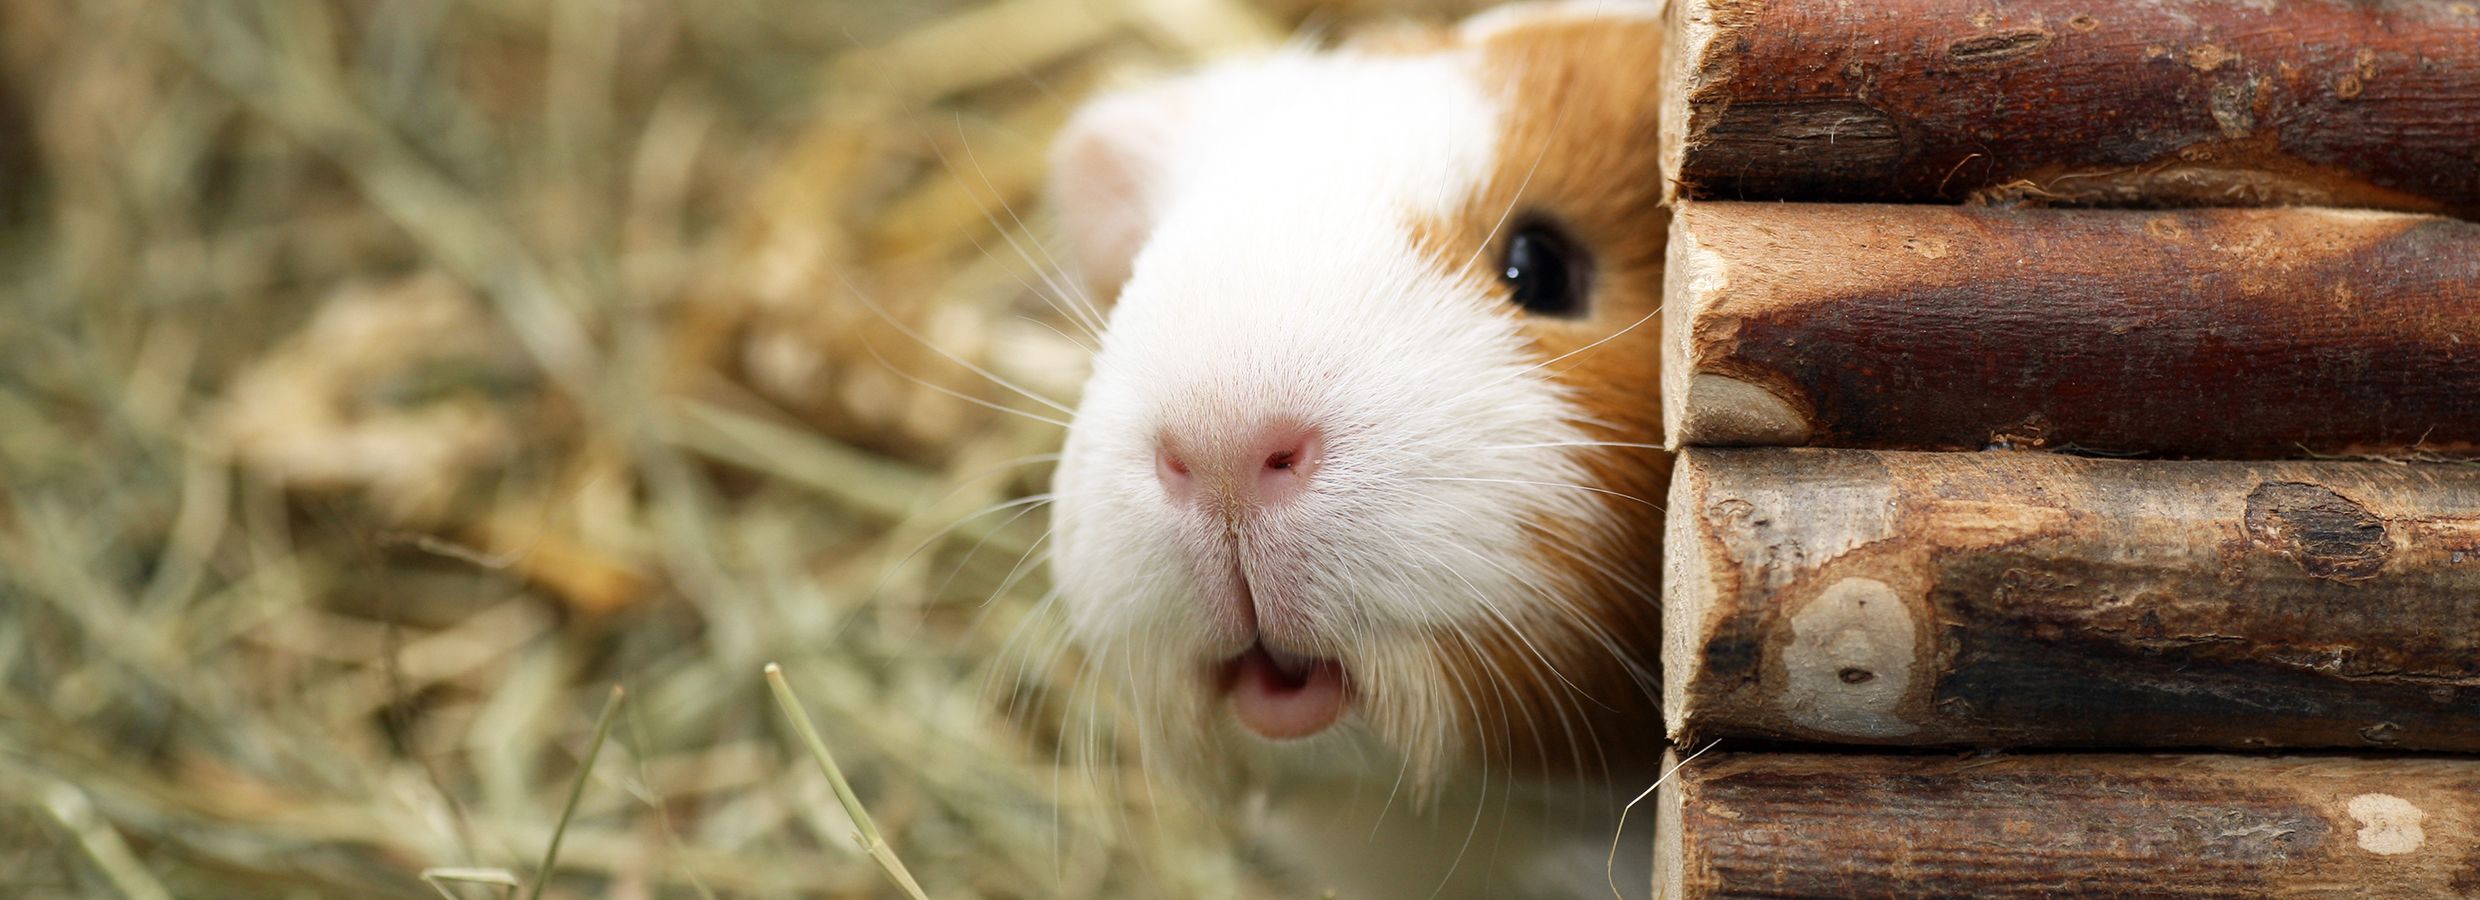 Guinea Pigs: Care, Facts & Information